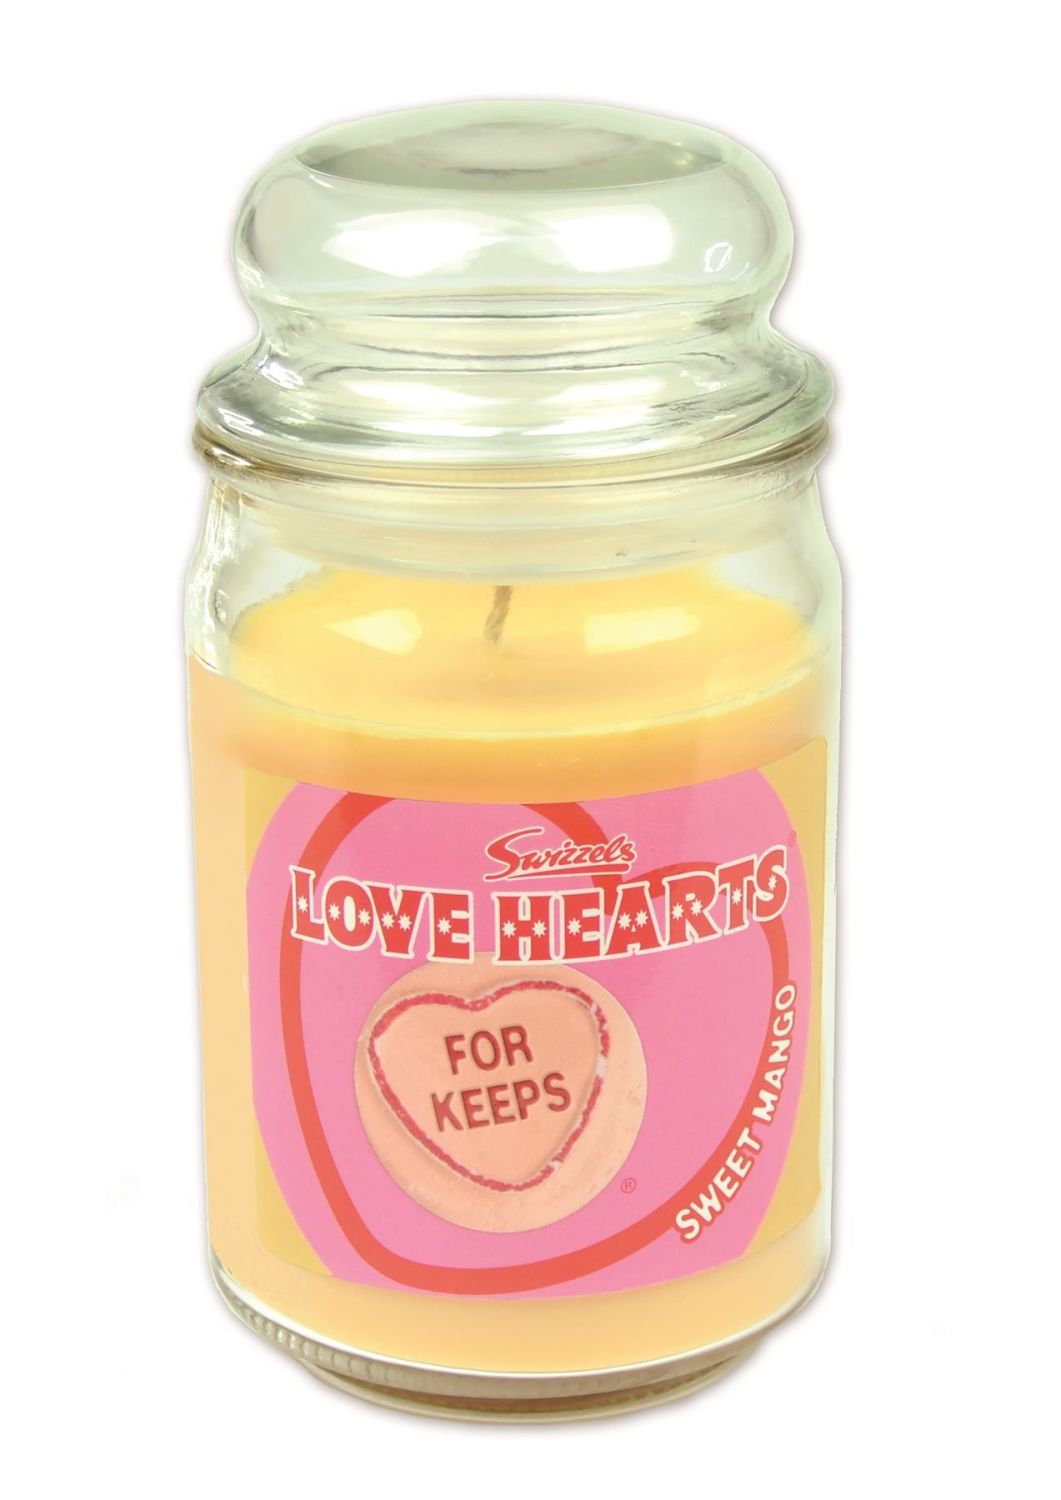 Swizzels Love Hearts Scented Candle (453g) Sweet Mango